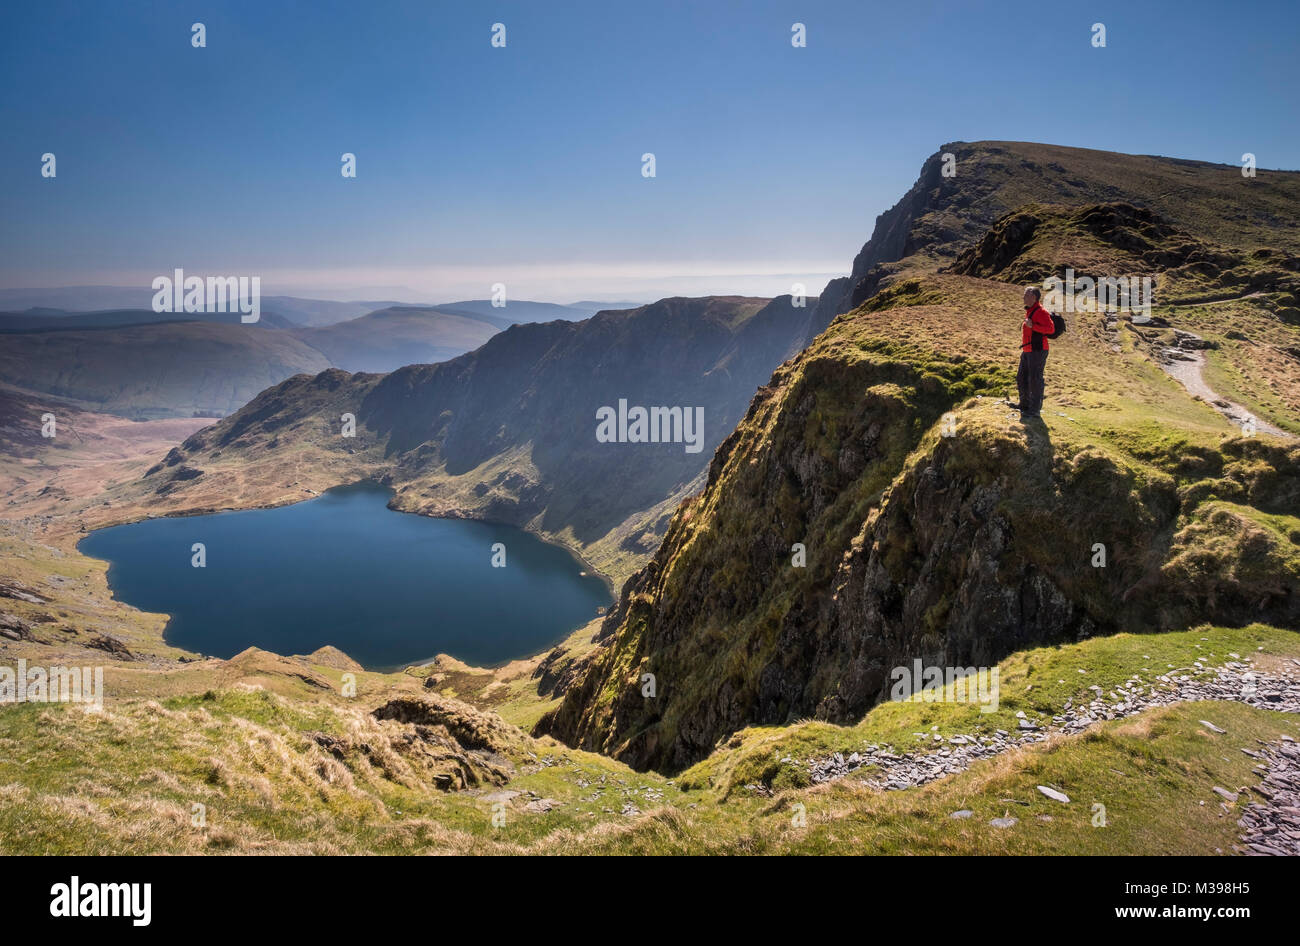 Walker looking out over Llyn Cau from Craig Cau, Cadair Idris, Snowdonia National Park, North Wales, UK MODEL RELEASED Stock Photo